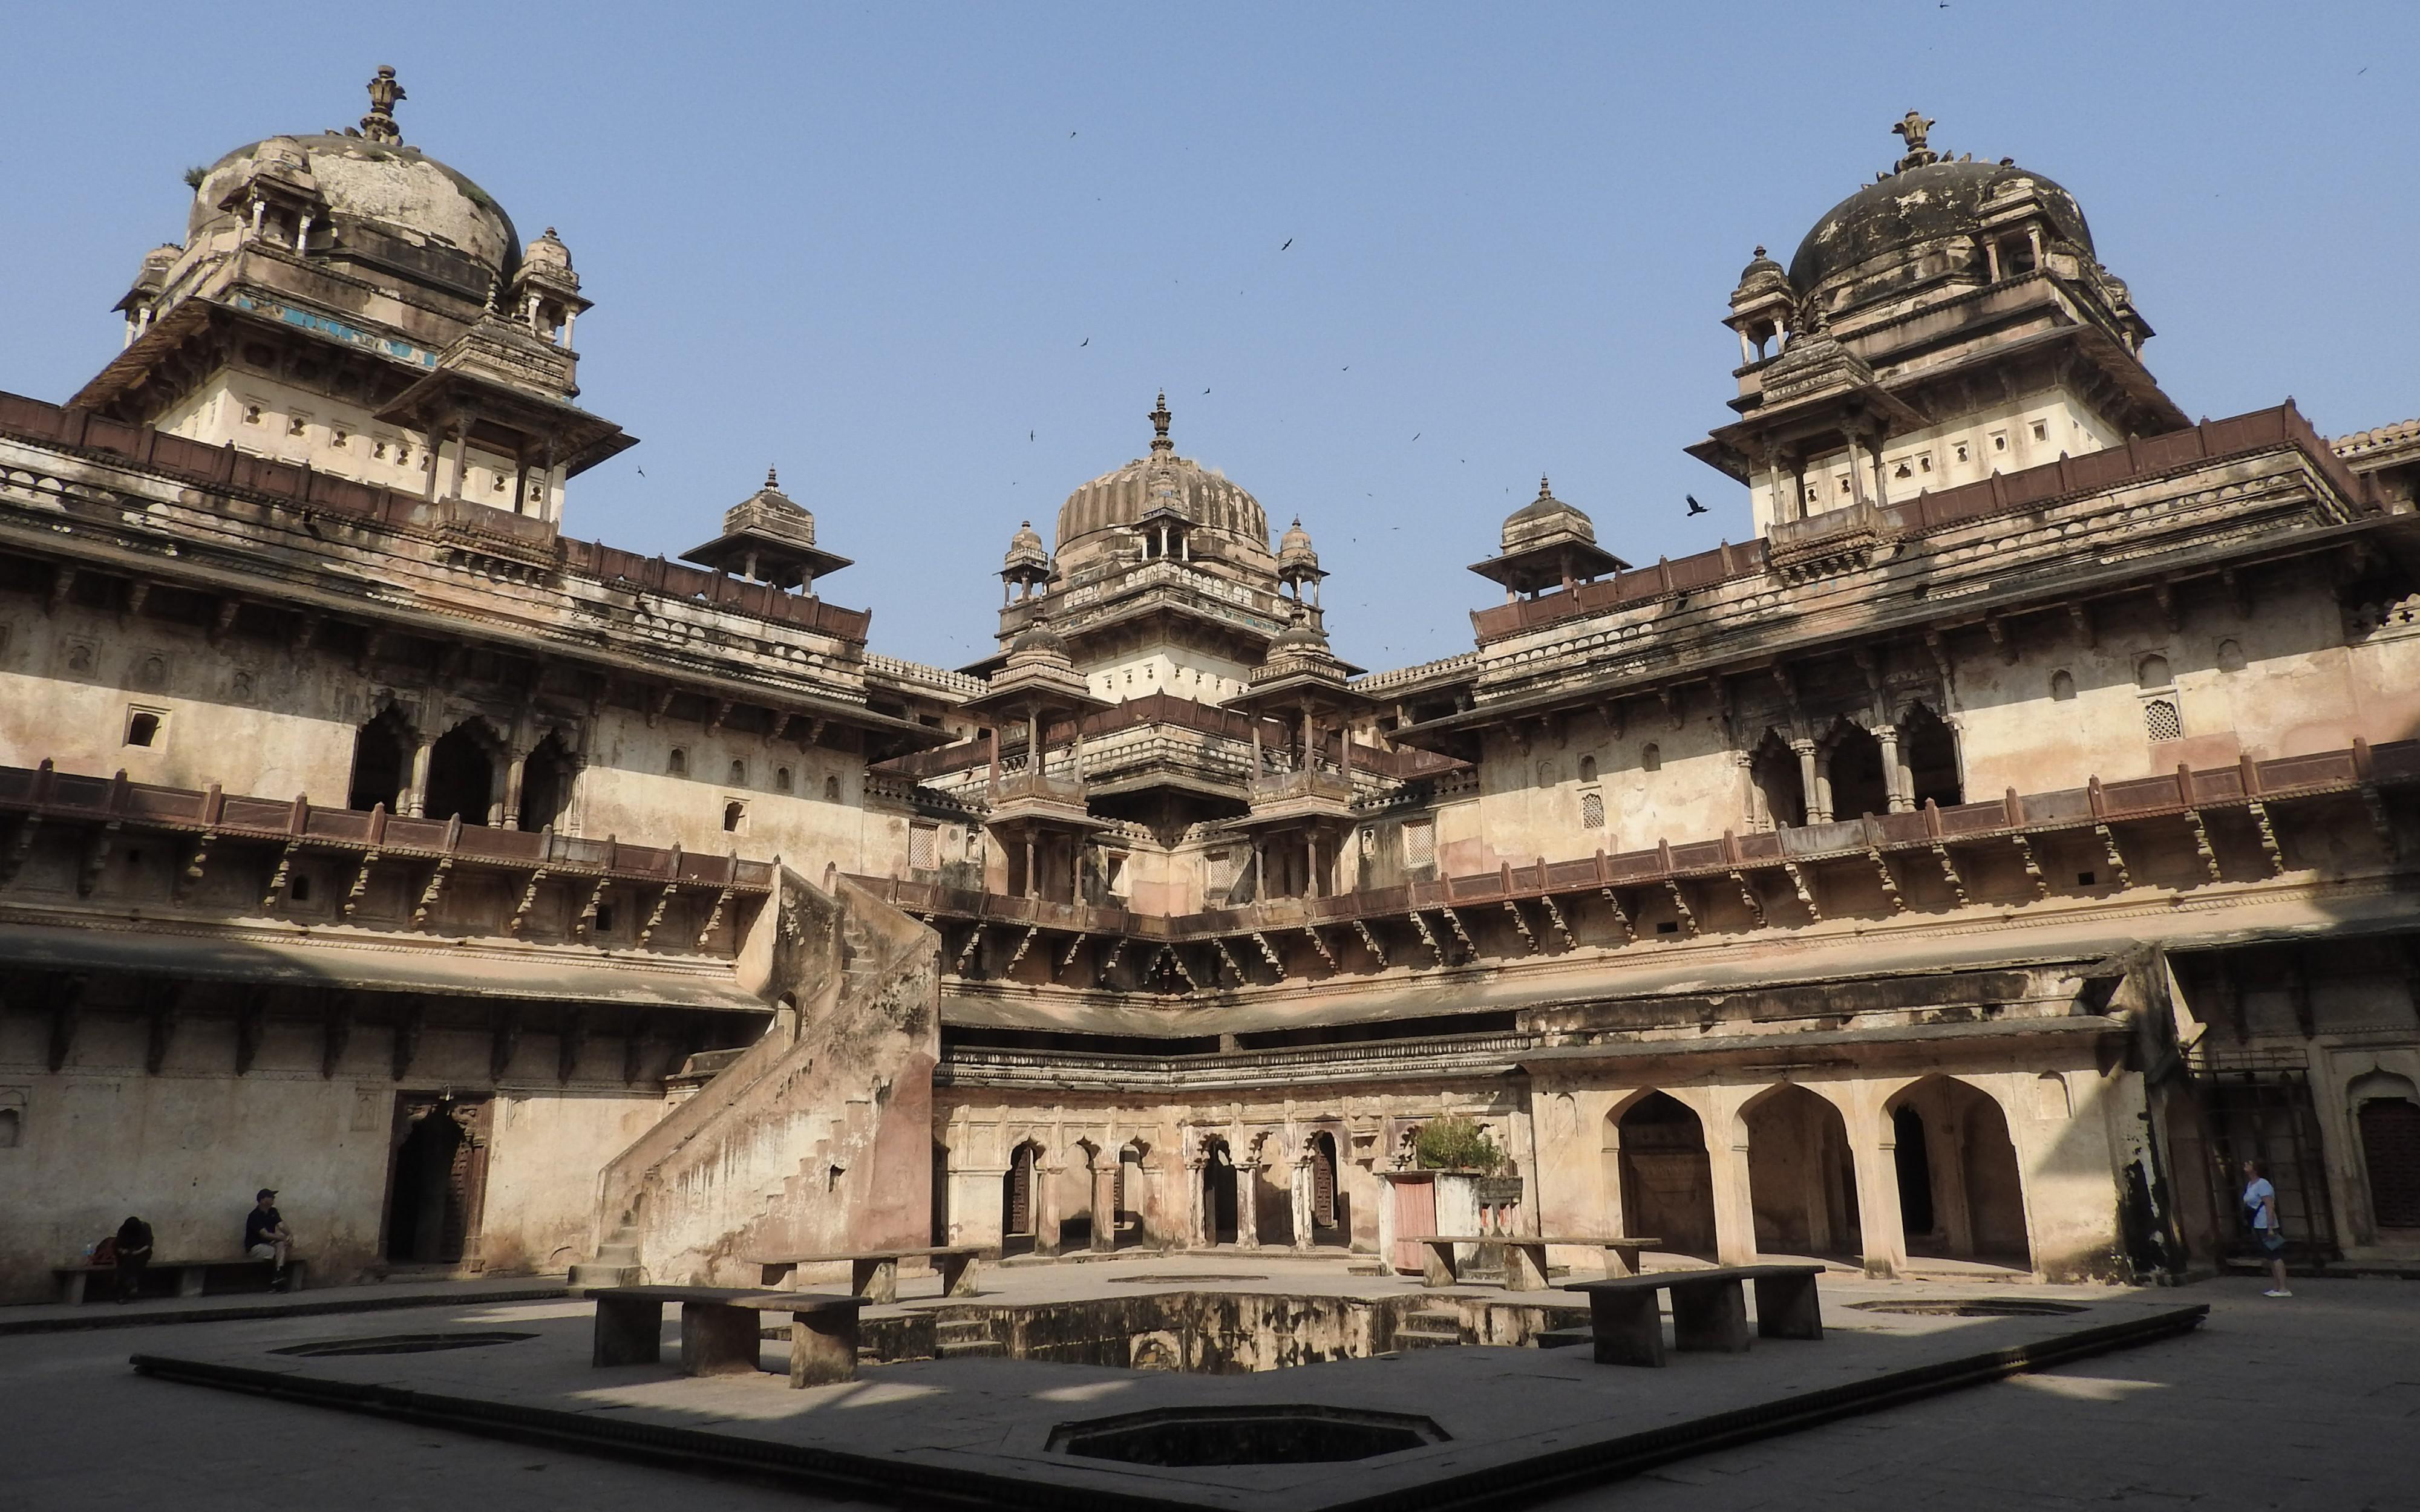 Conveniently sandwiched between the tourist-thronged cities of Agra and Khajuraho, Orchha has remained largely off the tourist radar despite being rich in history and culture.